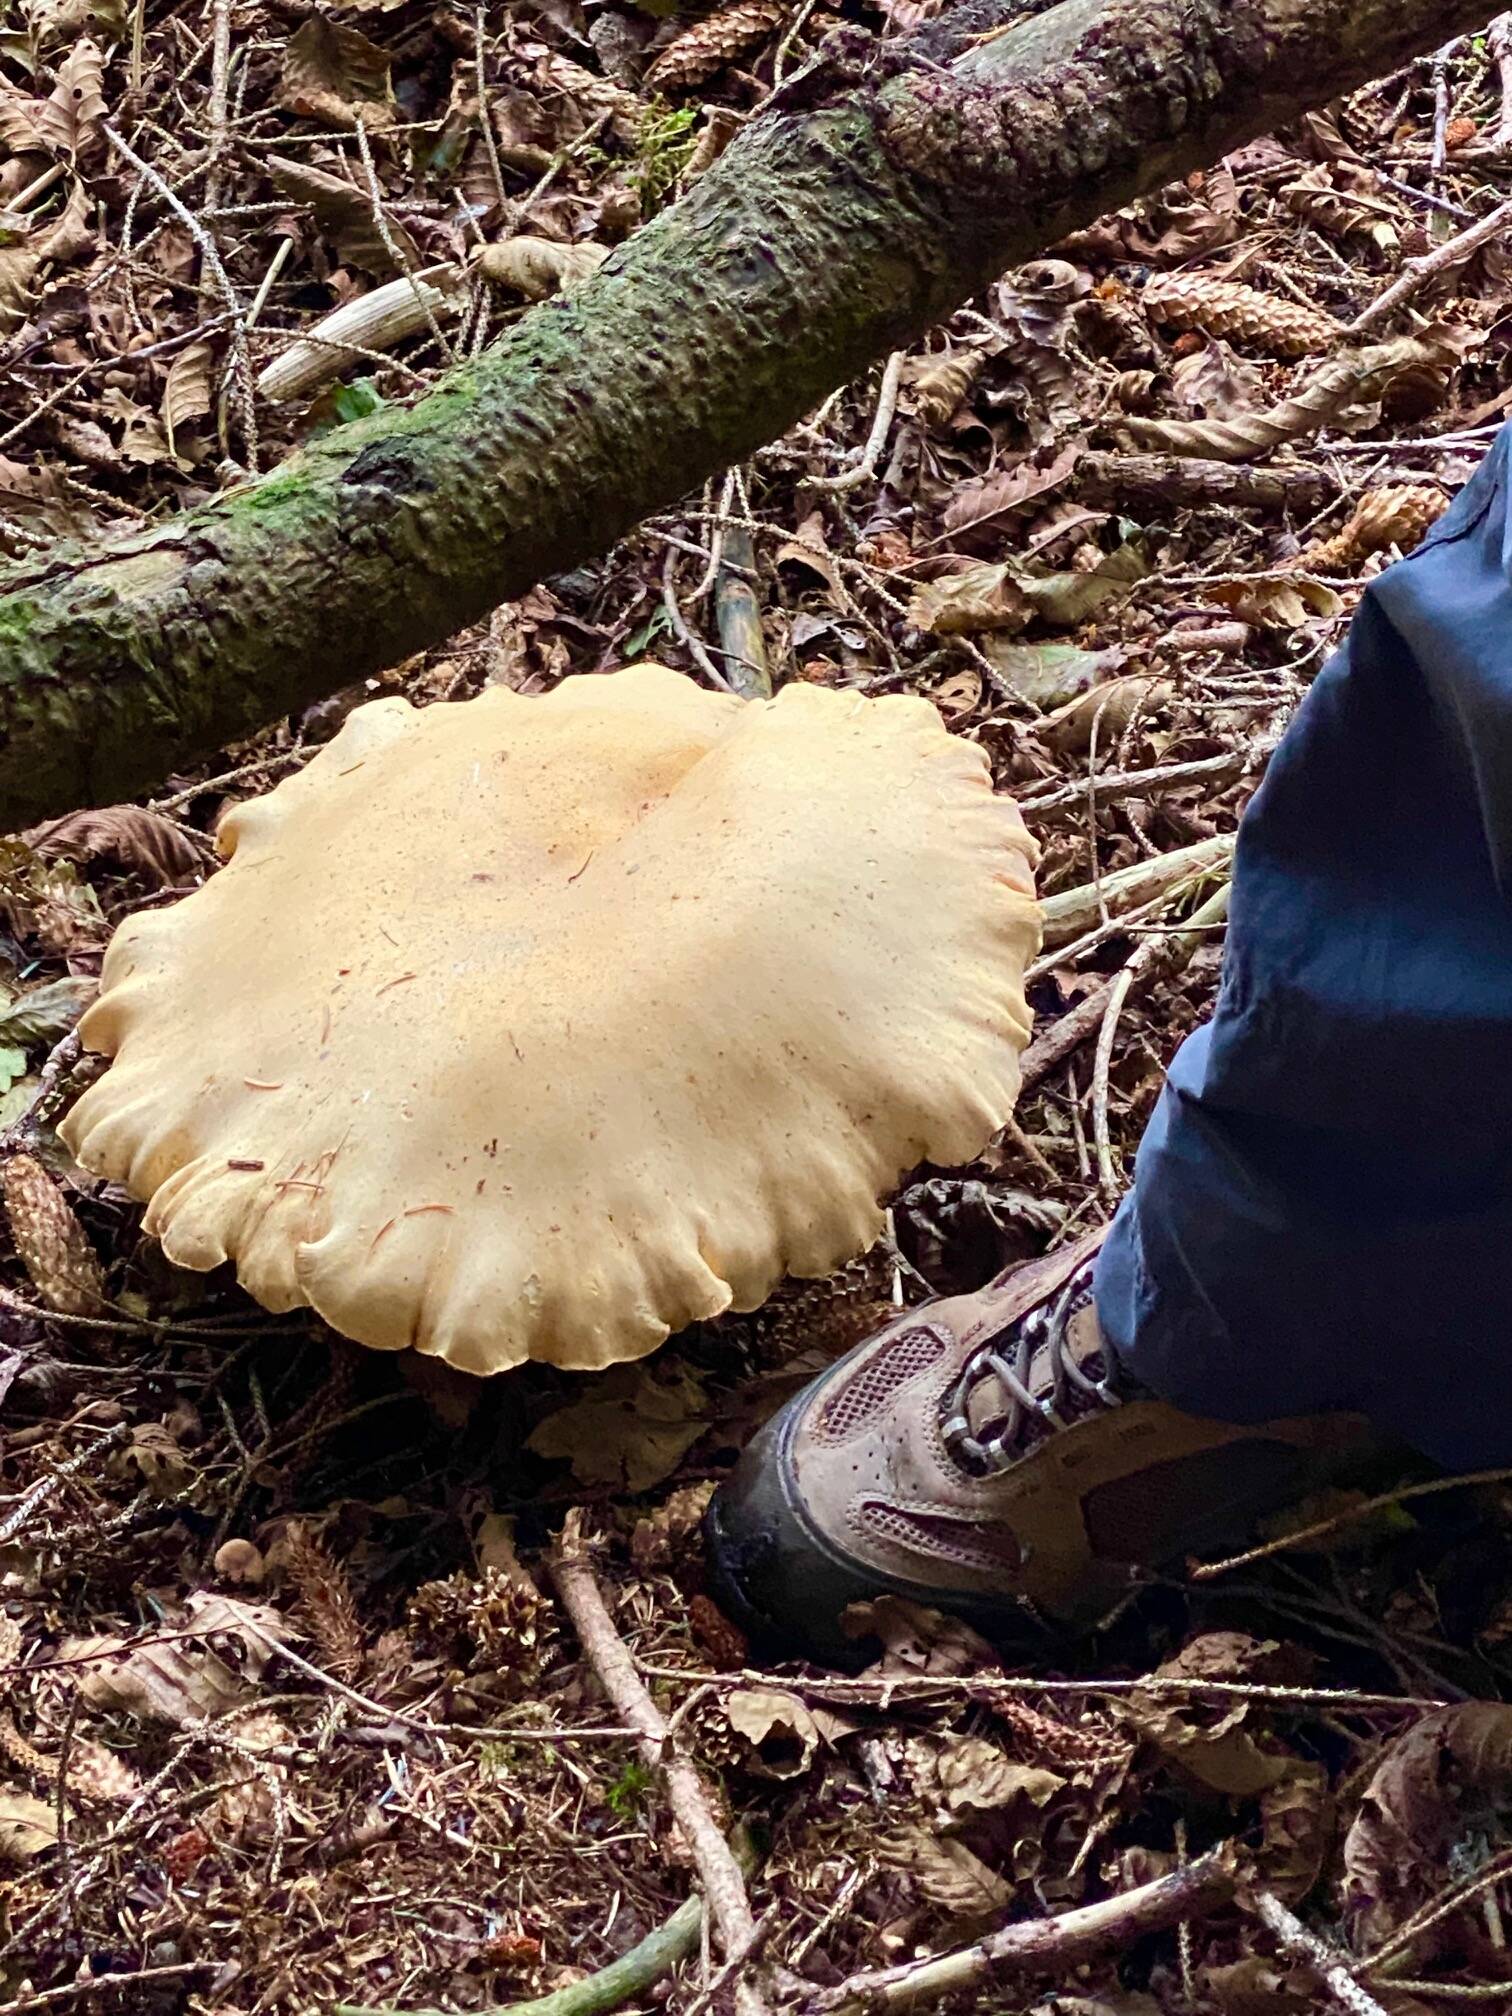 A large mushroom is spotted on the Peterson Creek Trail (with shoe for comparison). (Courtesy Photo / Denise Carroll)
A large mushroom is spotted on the Peterson Creek Trail (with shoe for comparison). (Courtesy Photo / Denise Carroll)